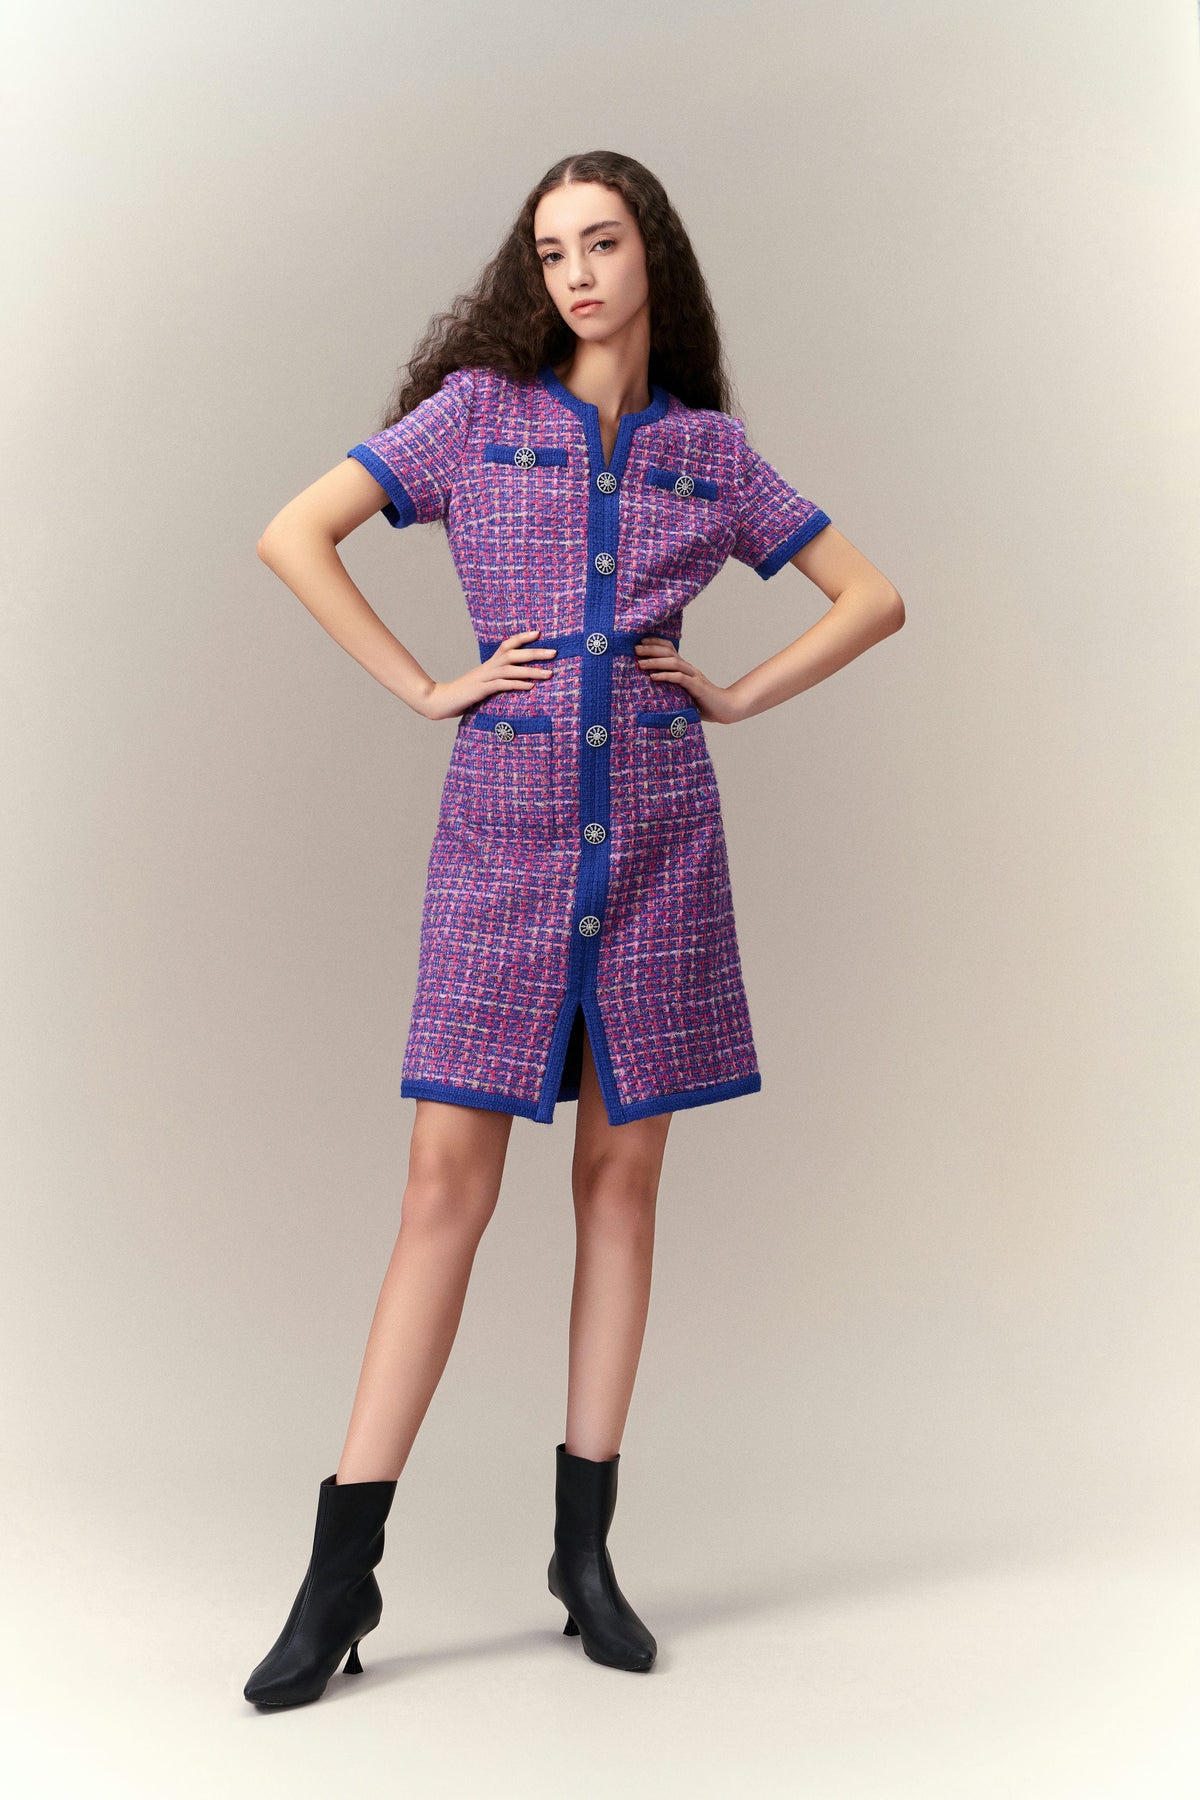 Primary Color Illusion Chunky Woven Tweed Dress